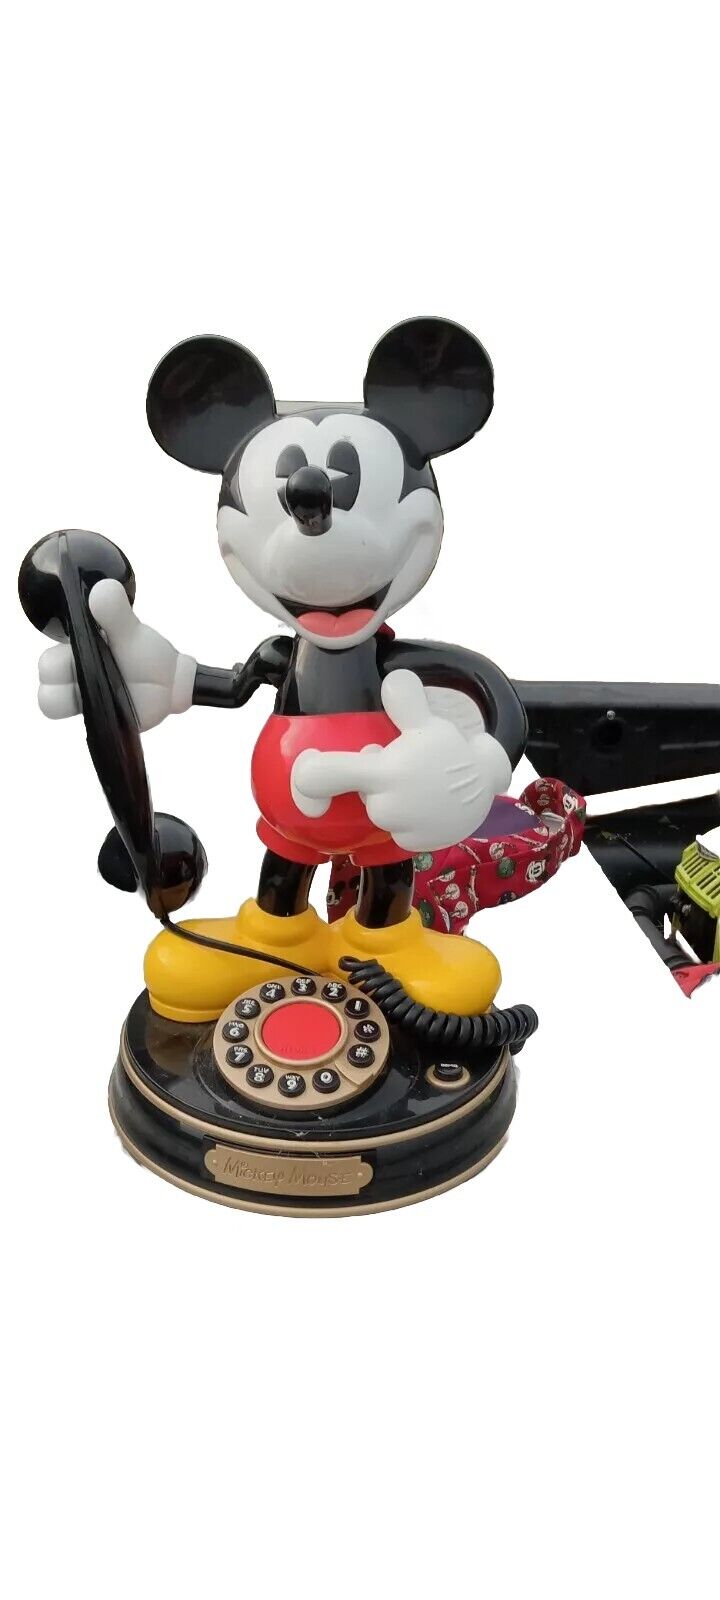 Vintage Classic Mickey Mouse Animated Talking Telephone Disney Phone Works